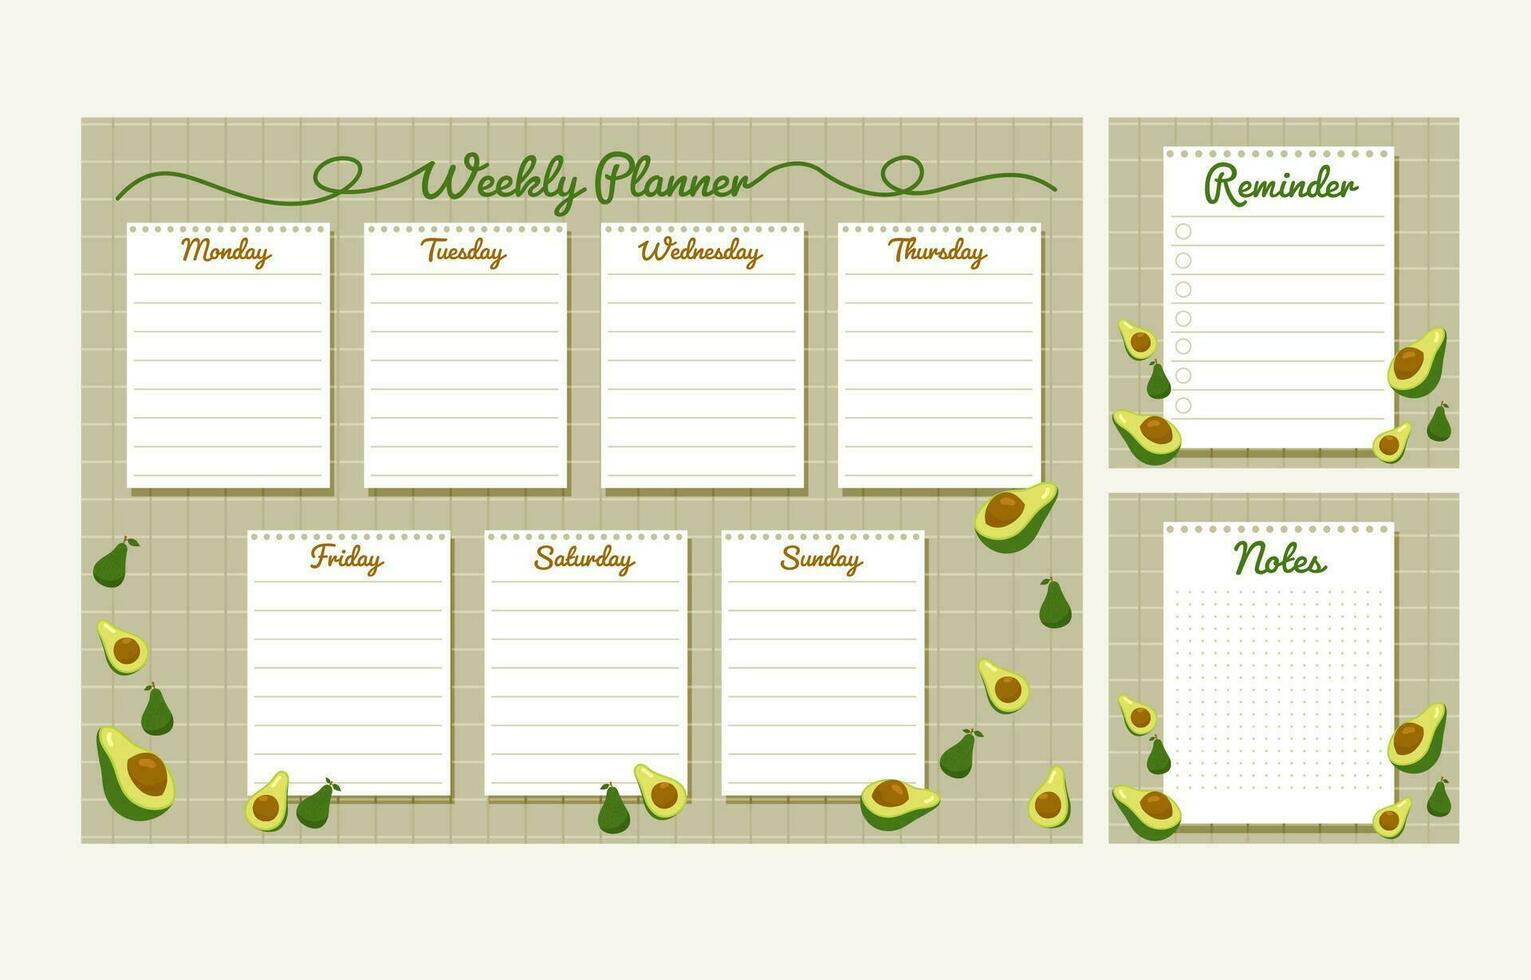 Weekly Planner Template For Productivity With Avocado Theme vector